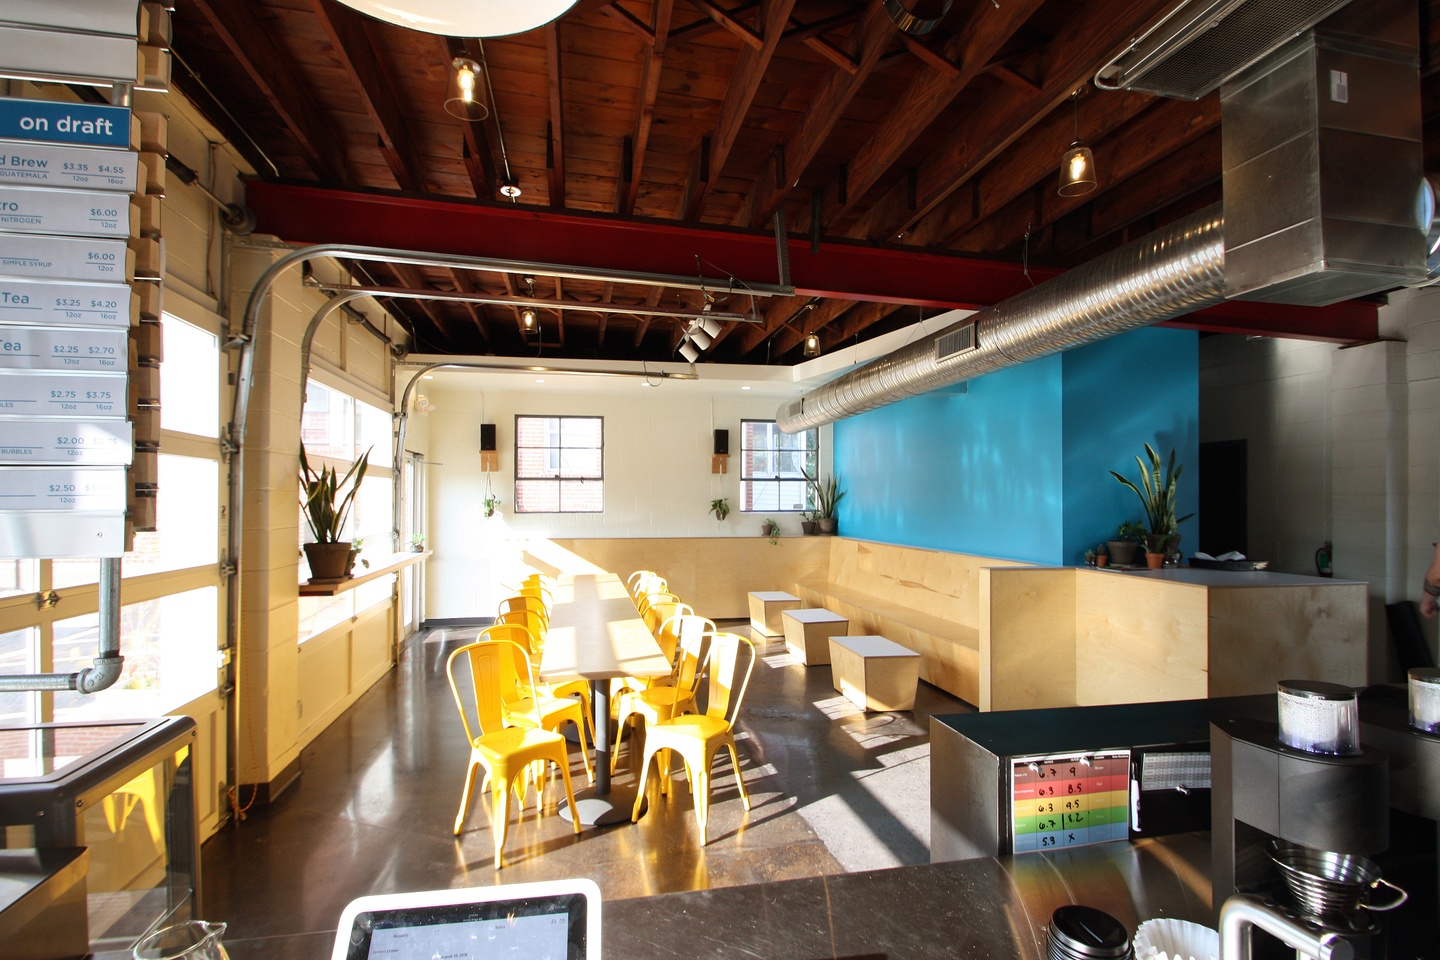 Interior of a coffee shop with exposed wooden beams, garage doors along one wall, pine wood tables and bench seating, and a baby blue accent wall.